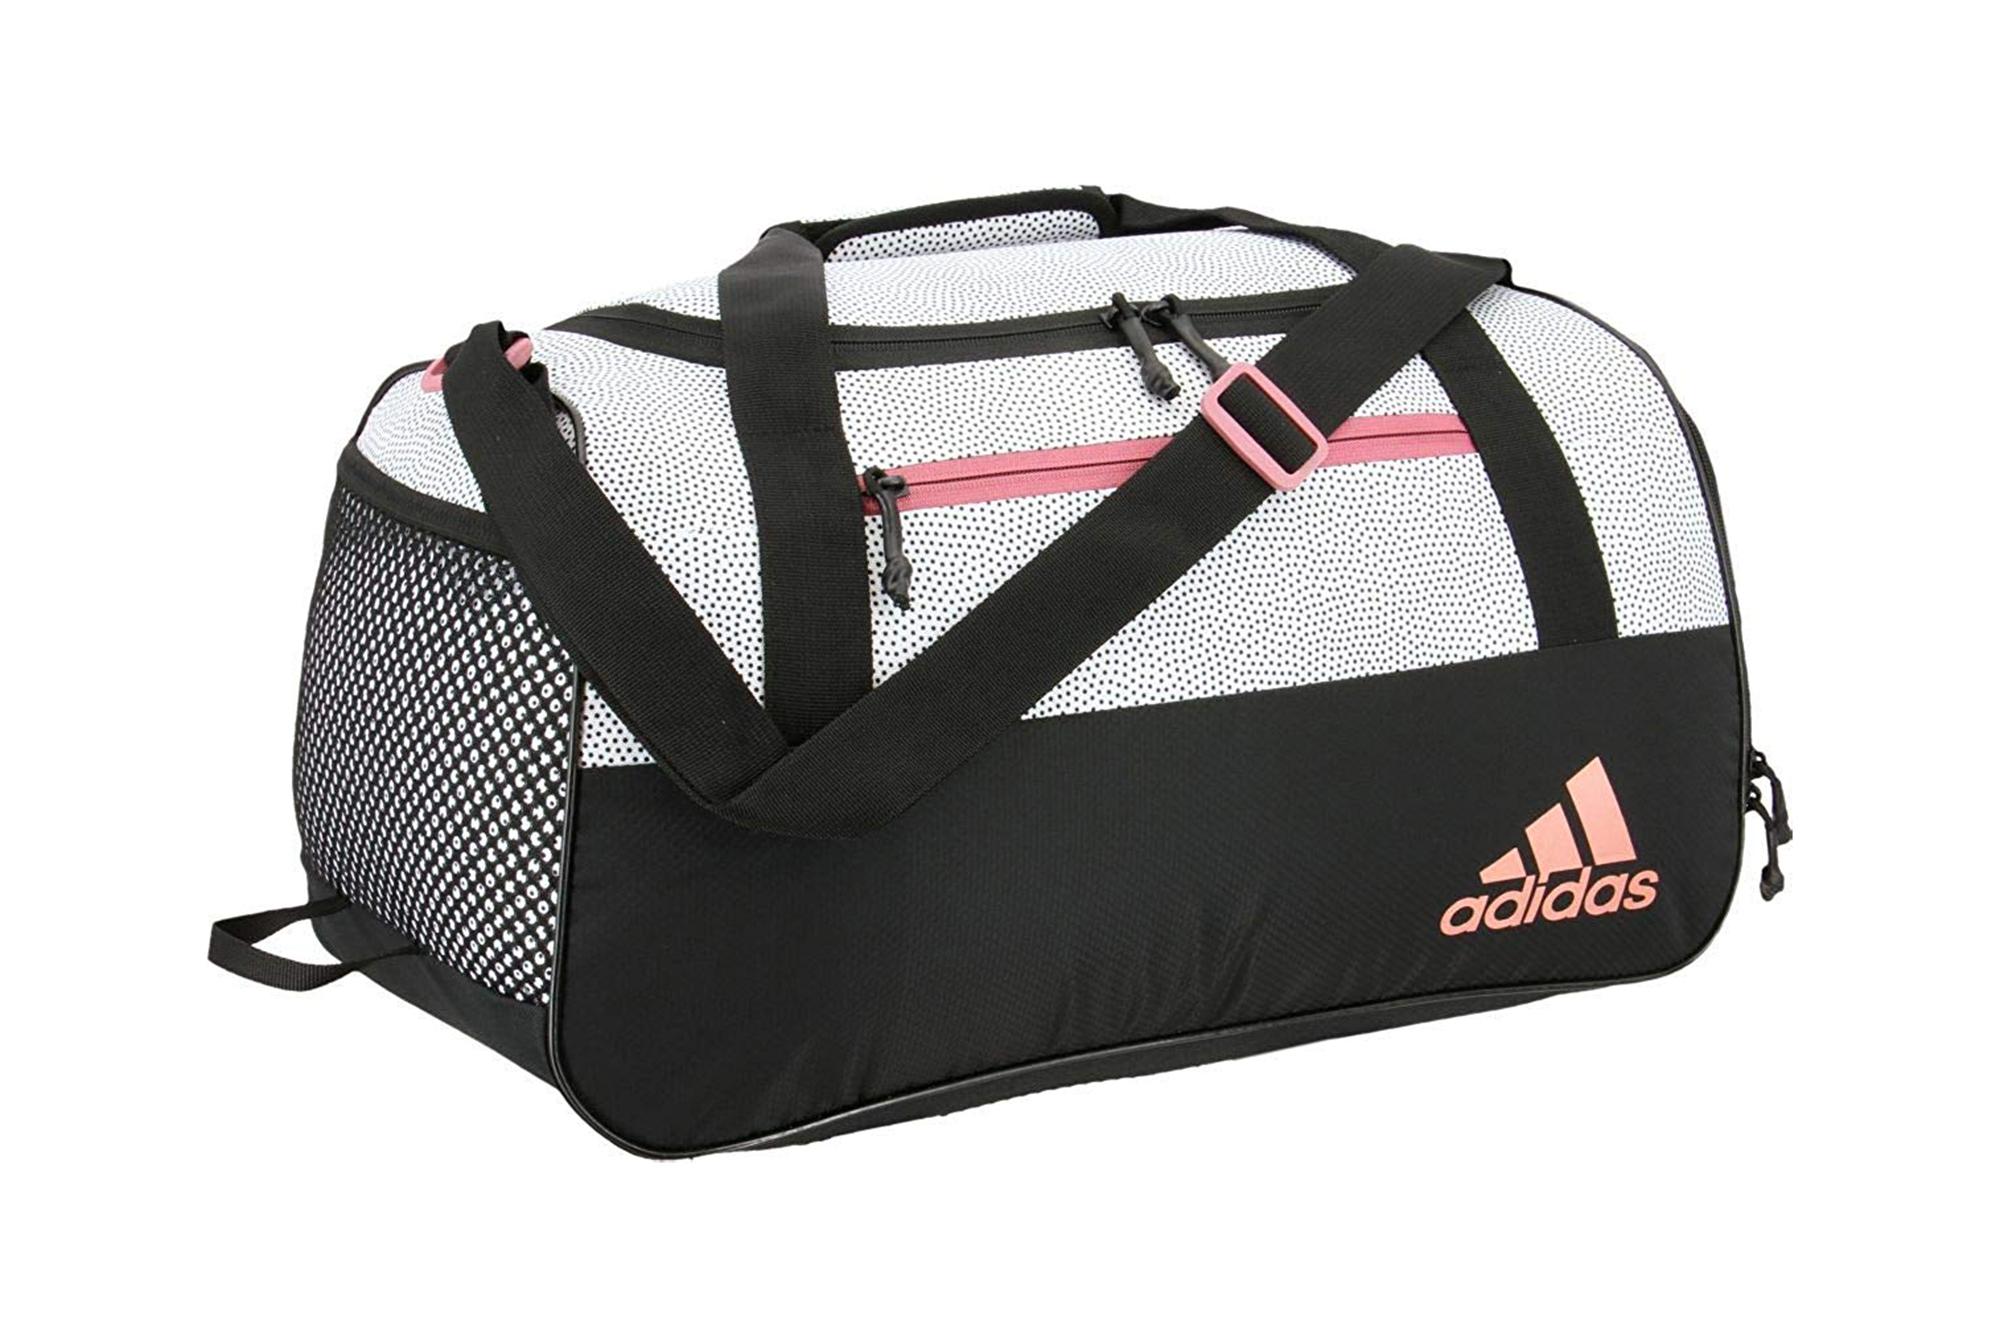 This Adidas Gym Bag Is So You'll Want to Carry It Everywhere